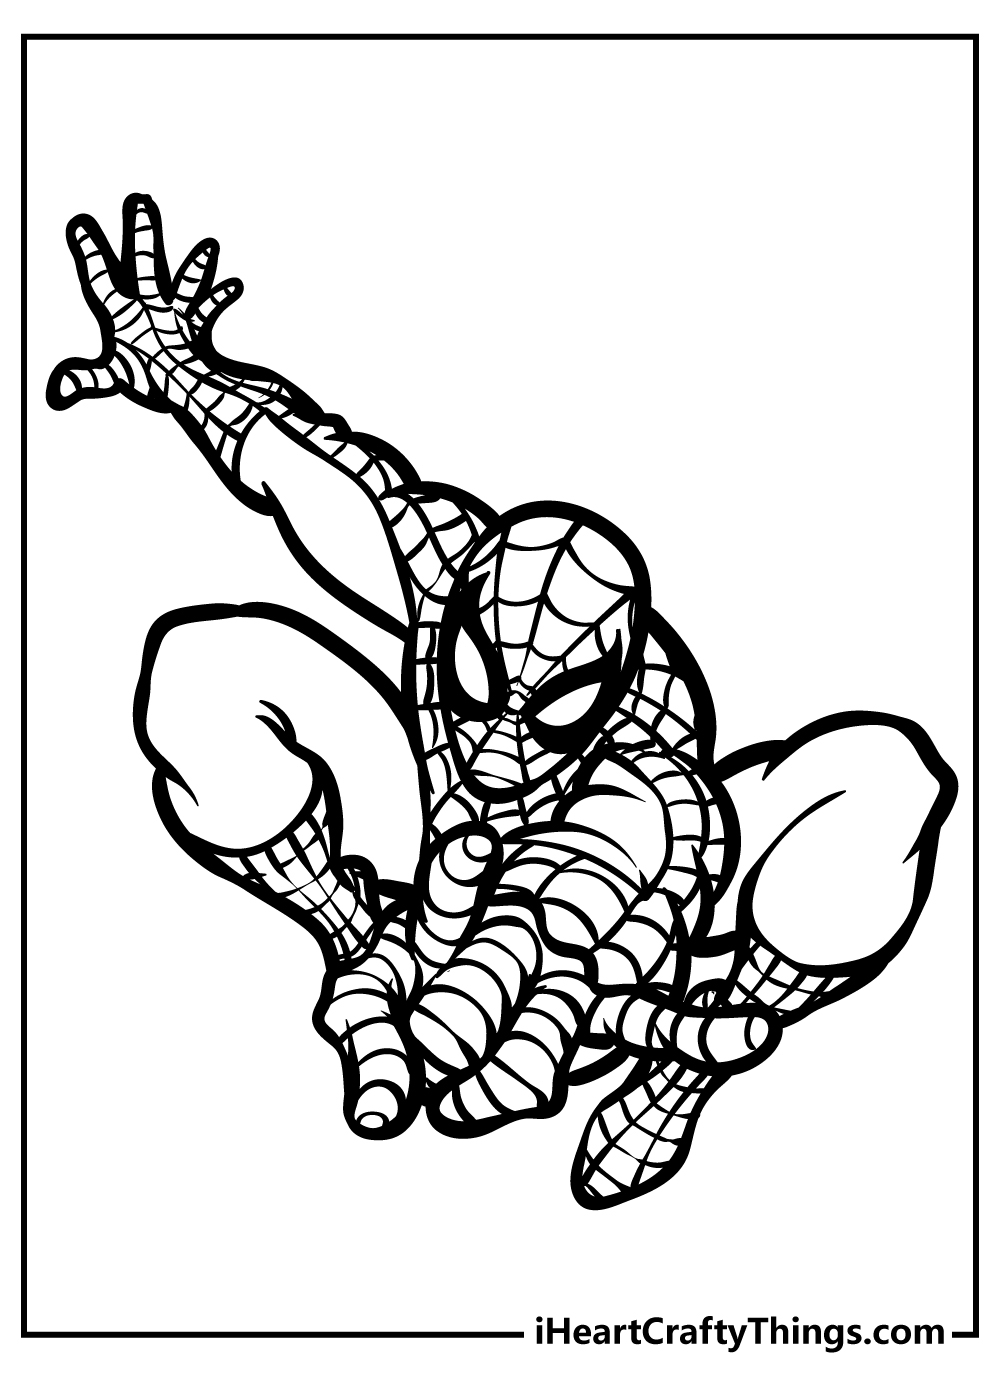 Spider-Man coloring pages free printable